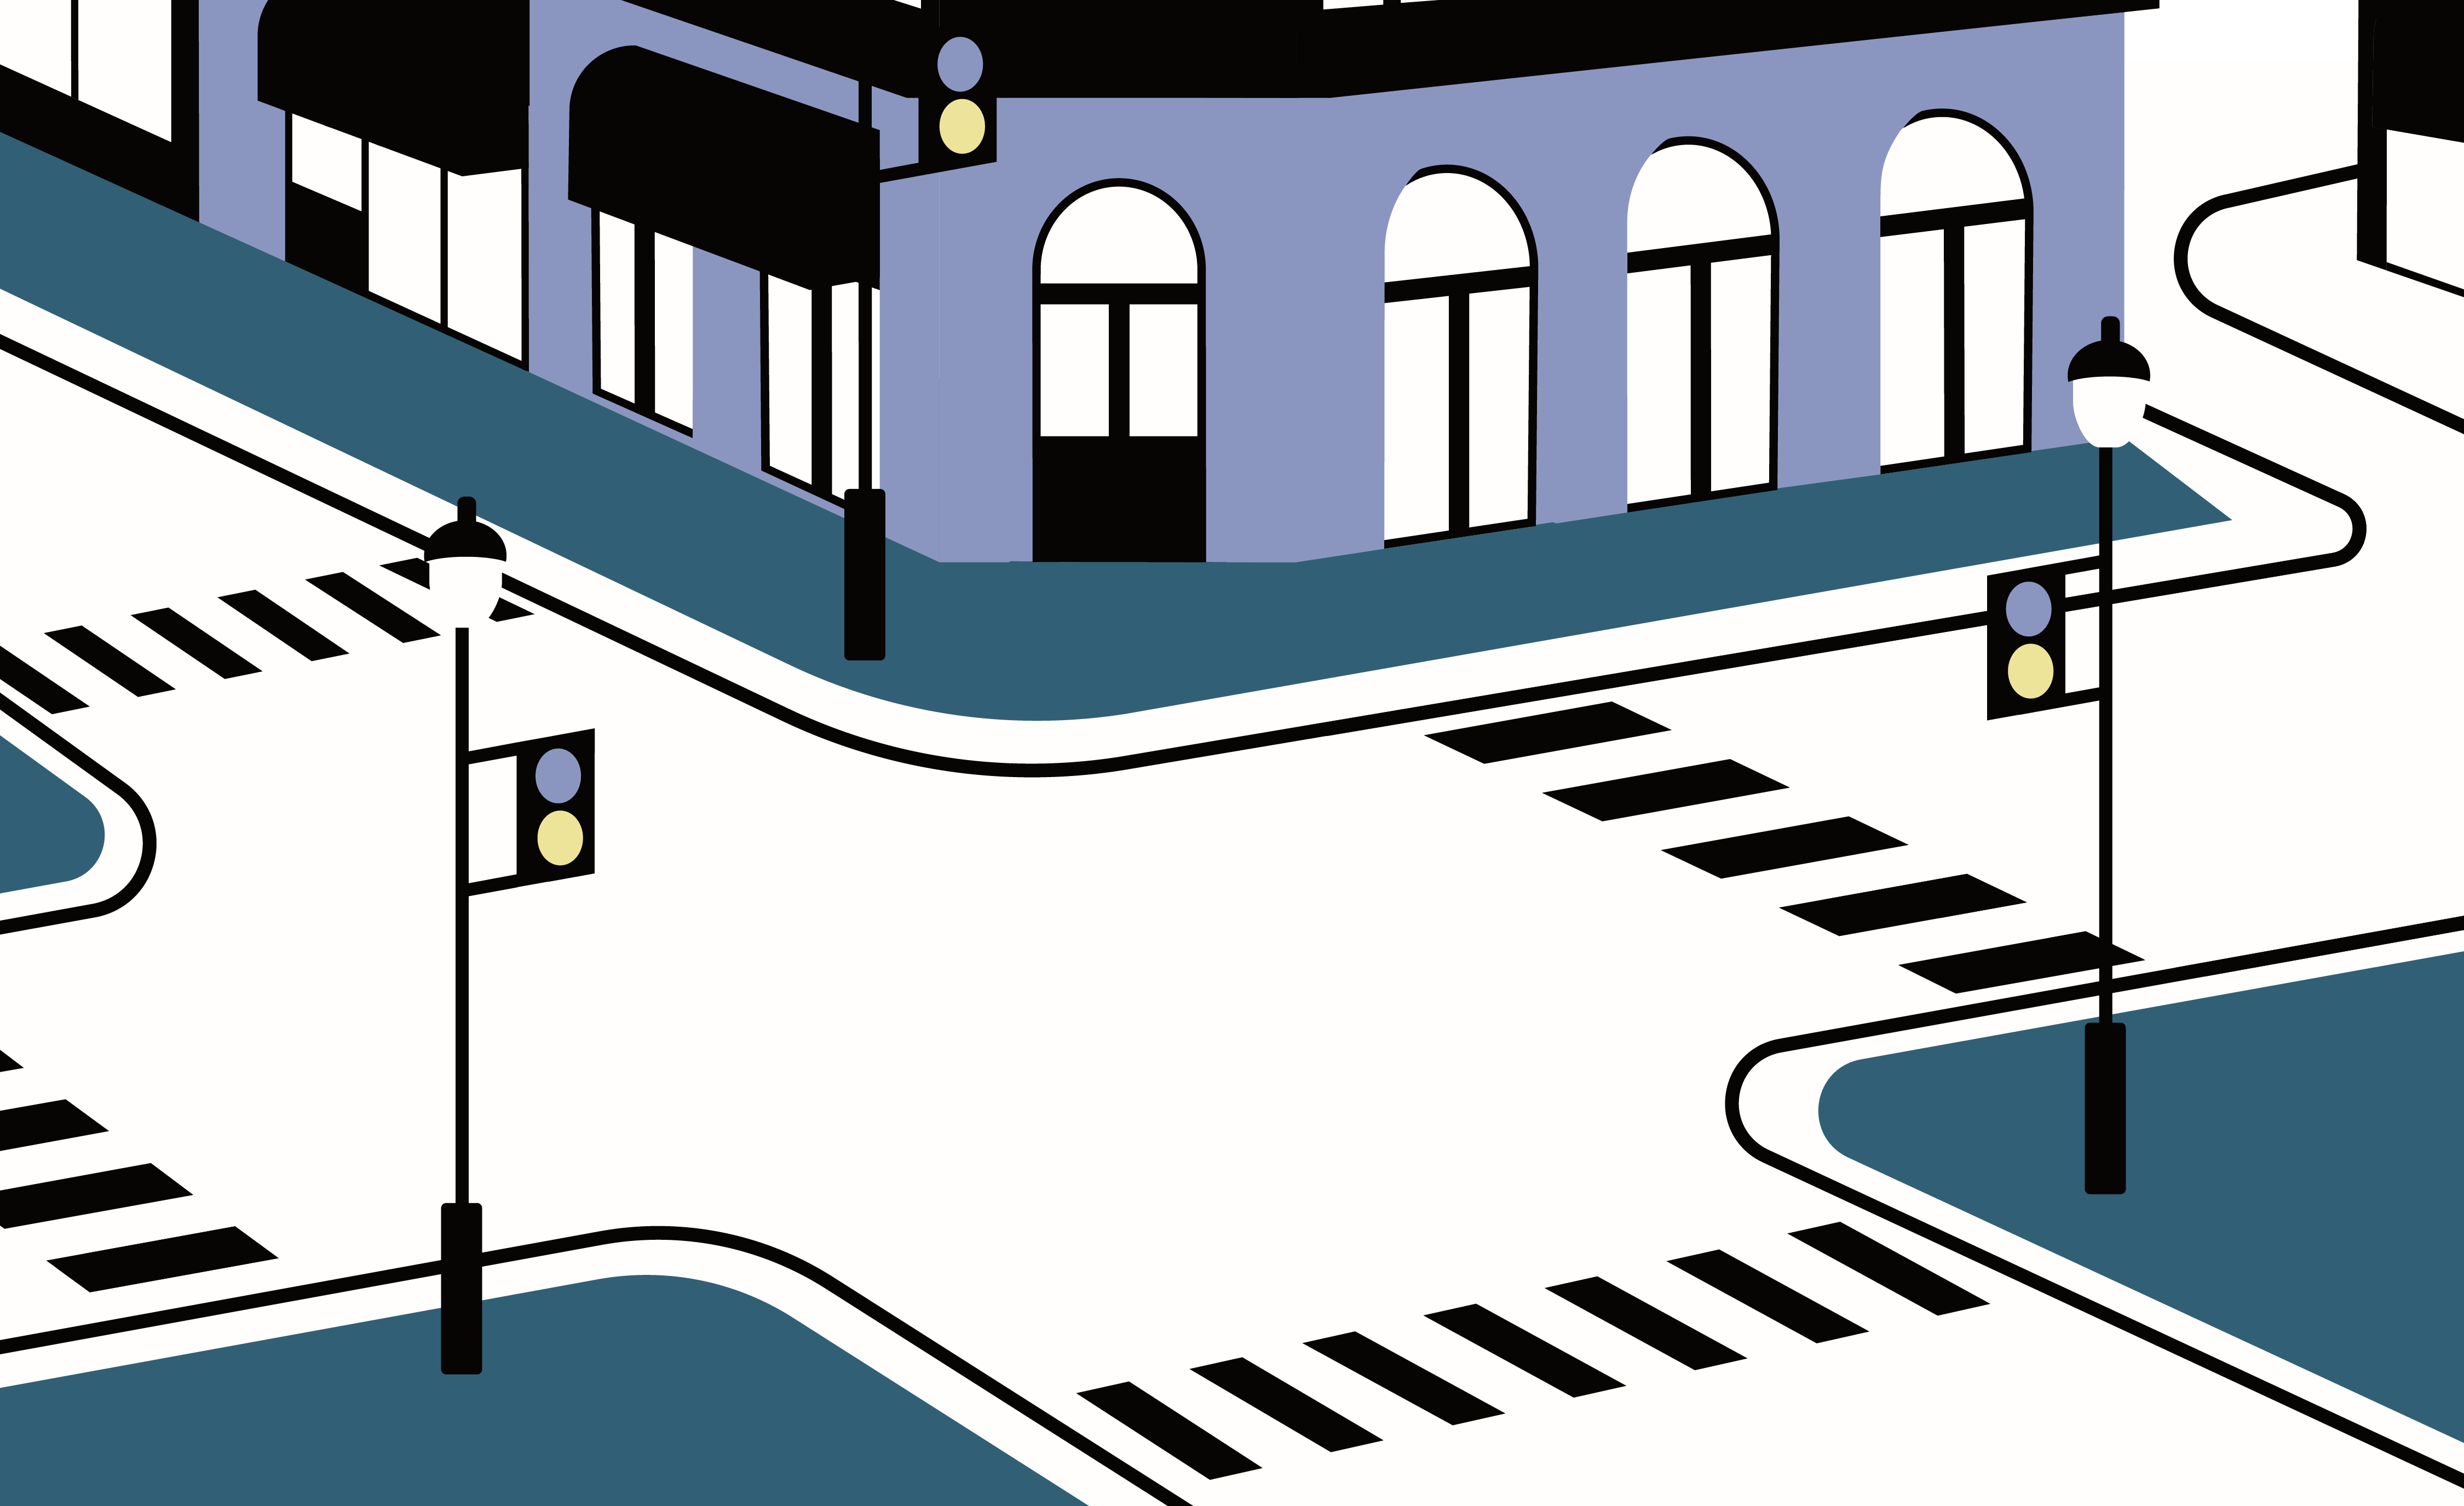 Graphic illustration of a street intersection